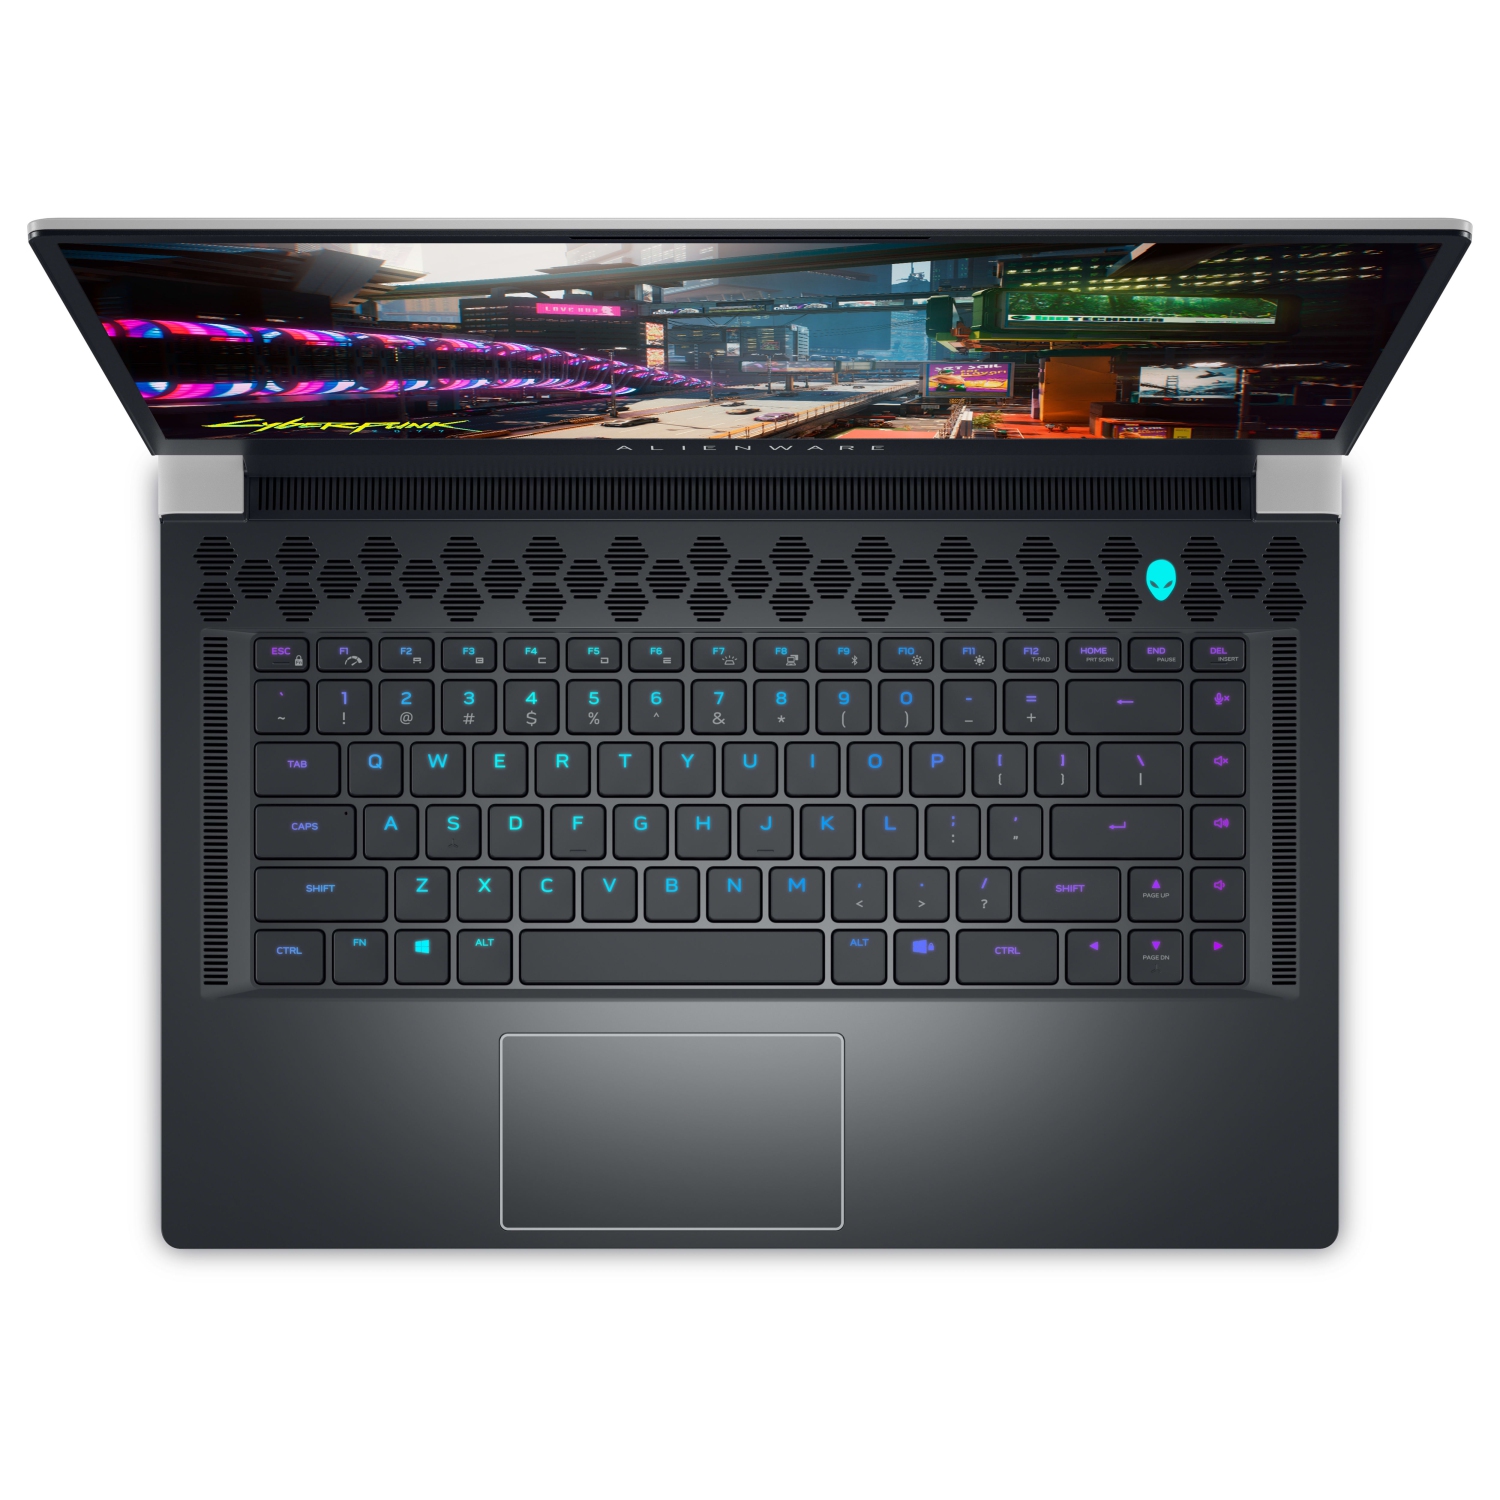 Refurbished (Excellent) – Dell Alienware X15 R2 Gaming Laptop (2022) | 15.6" FHD | Core i7 - 1TB SSD - 32GB RAM - 3070 Ti | 14 Cores @ 4.7 GHz - 12th Gen CPU - 8GB GDDR6X